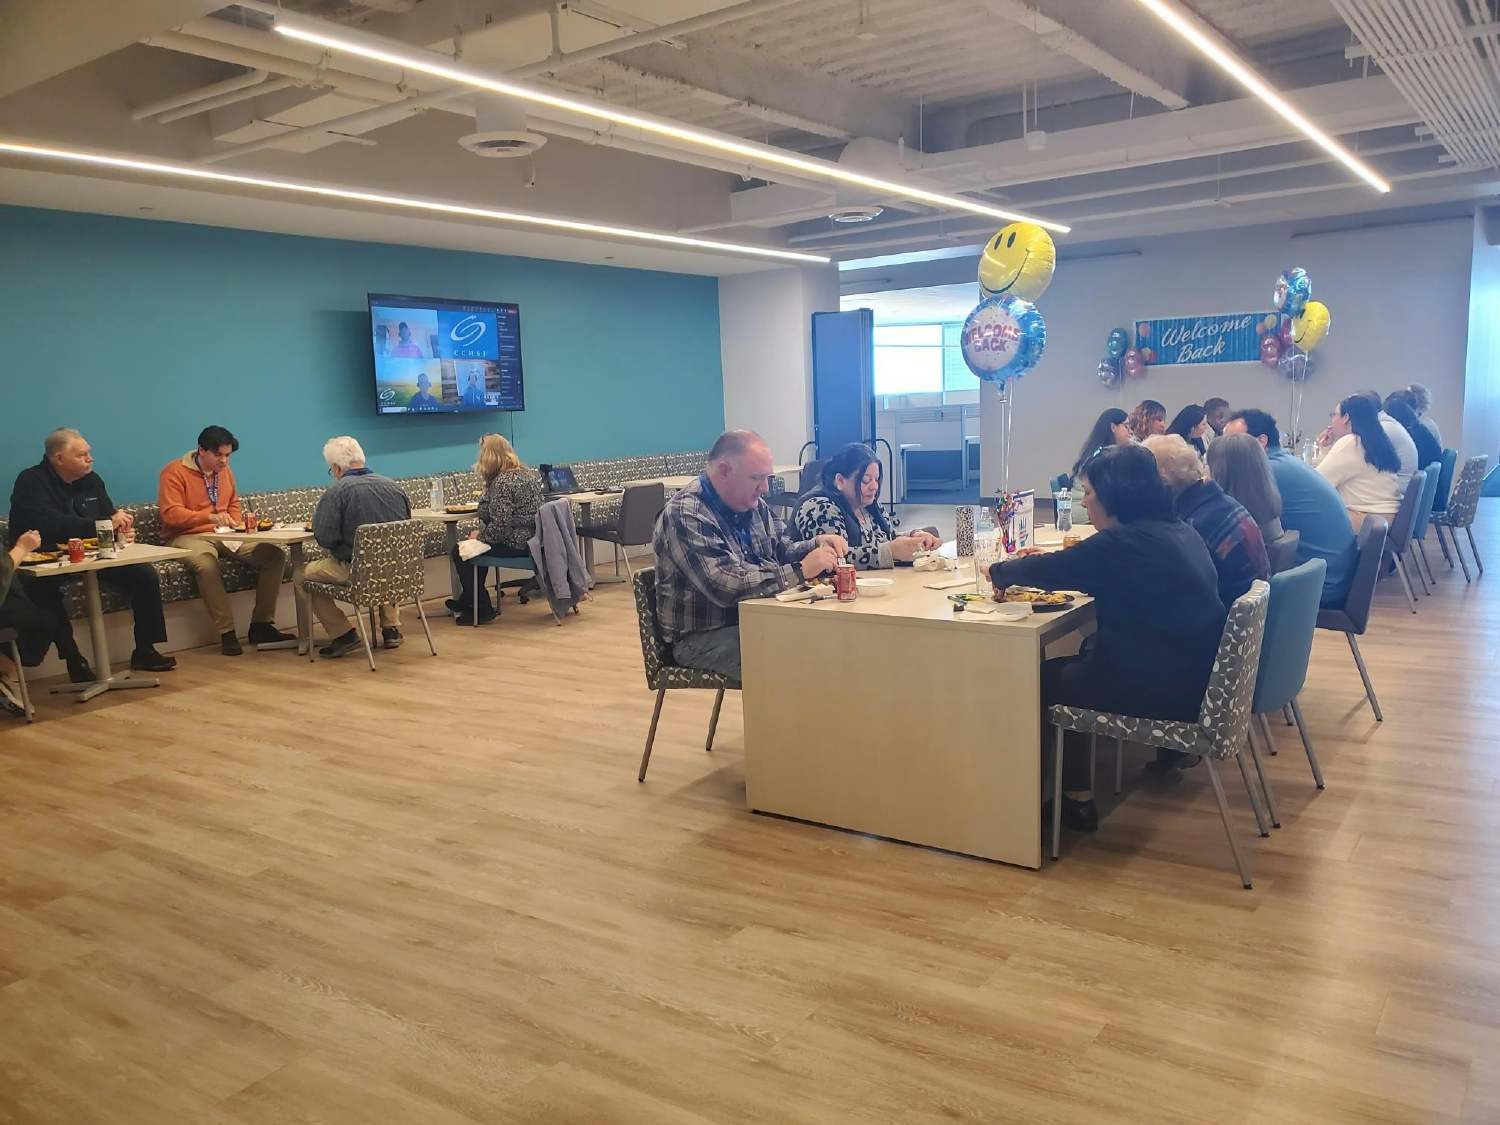 After renovations to our Lisle office were complete, a welcome back employee luncheon was held